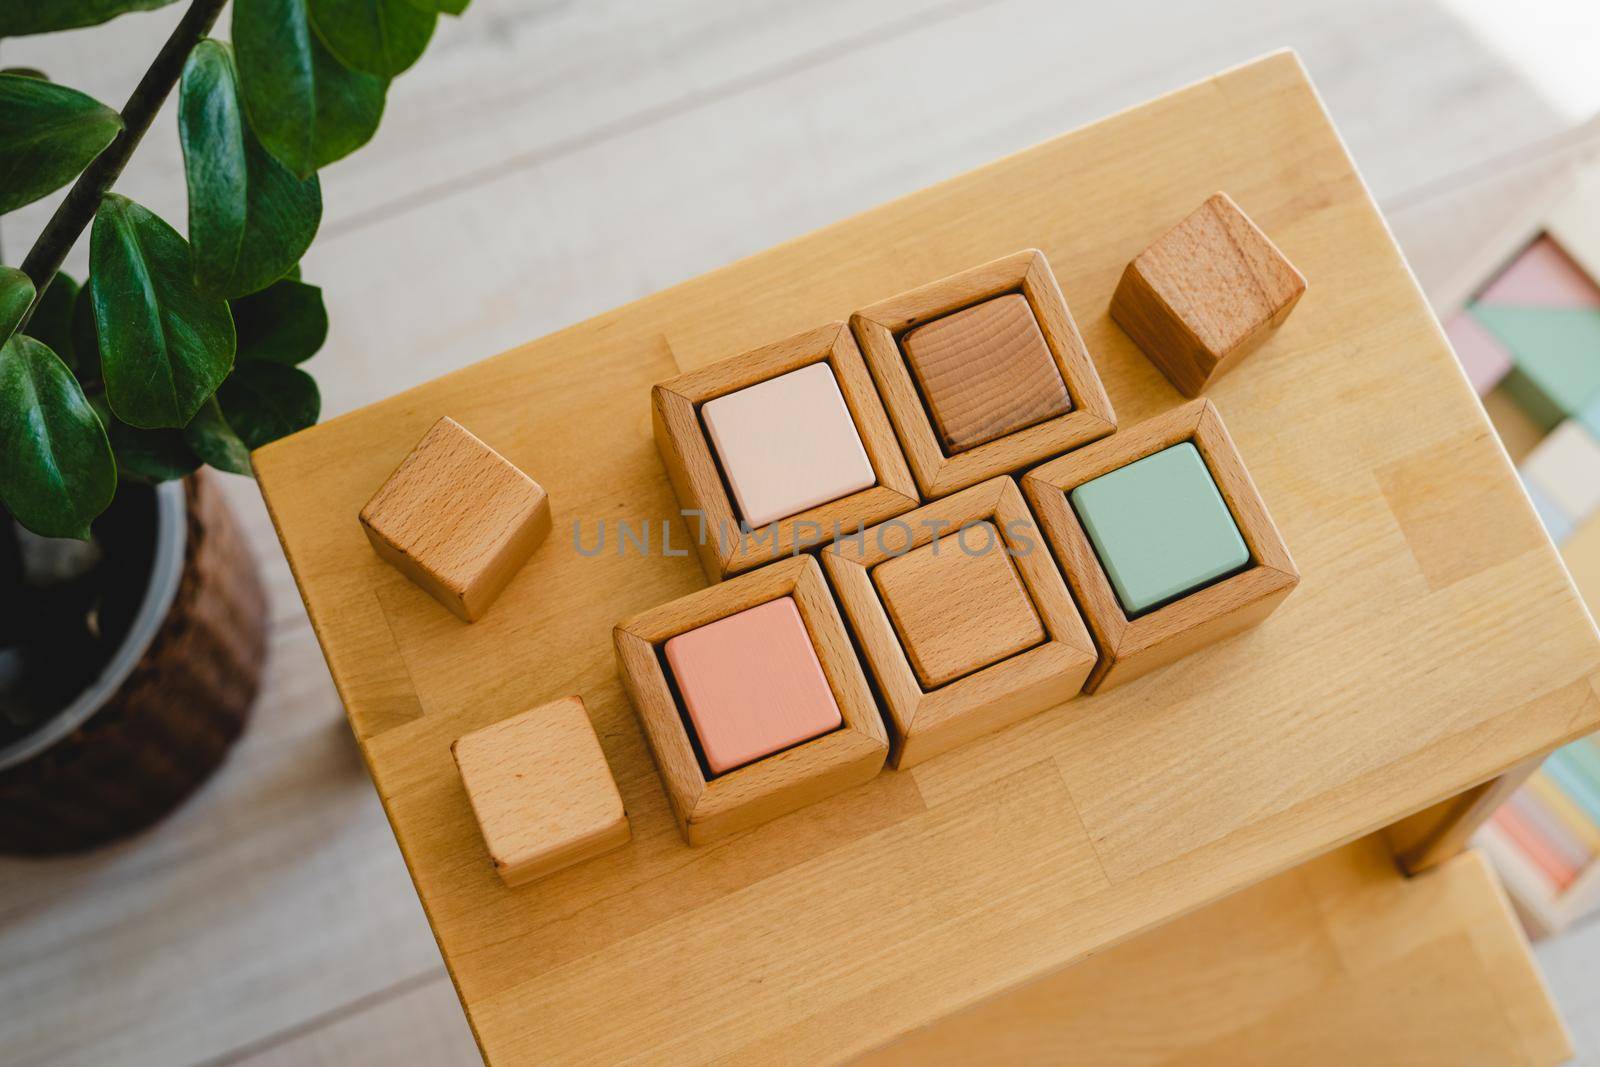 Wooden Montessori cubes. Eco-friendly toys for preschoolers. Toys made of natural material. No plastic toys. Wooden shelf with children's cubes.